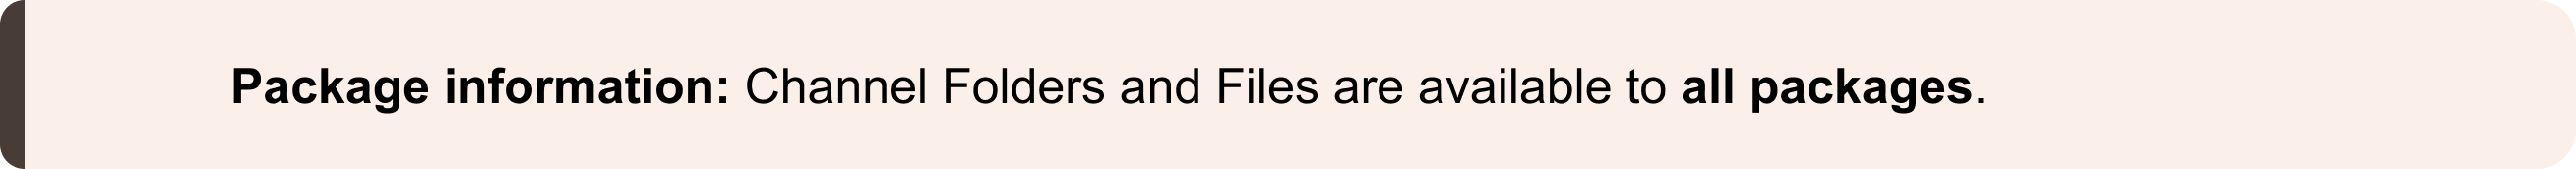 Channel_Folders_and_Files_1.png